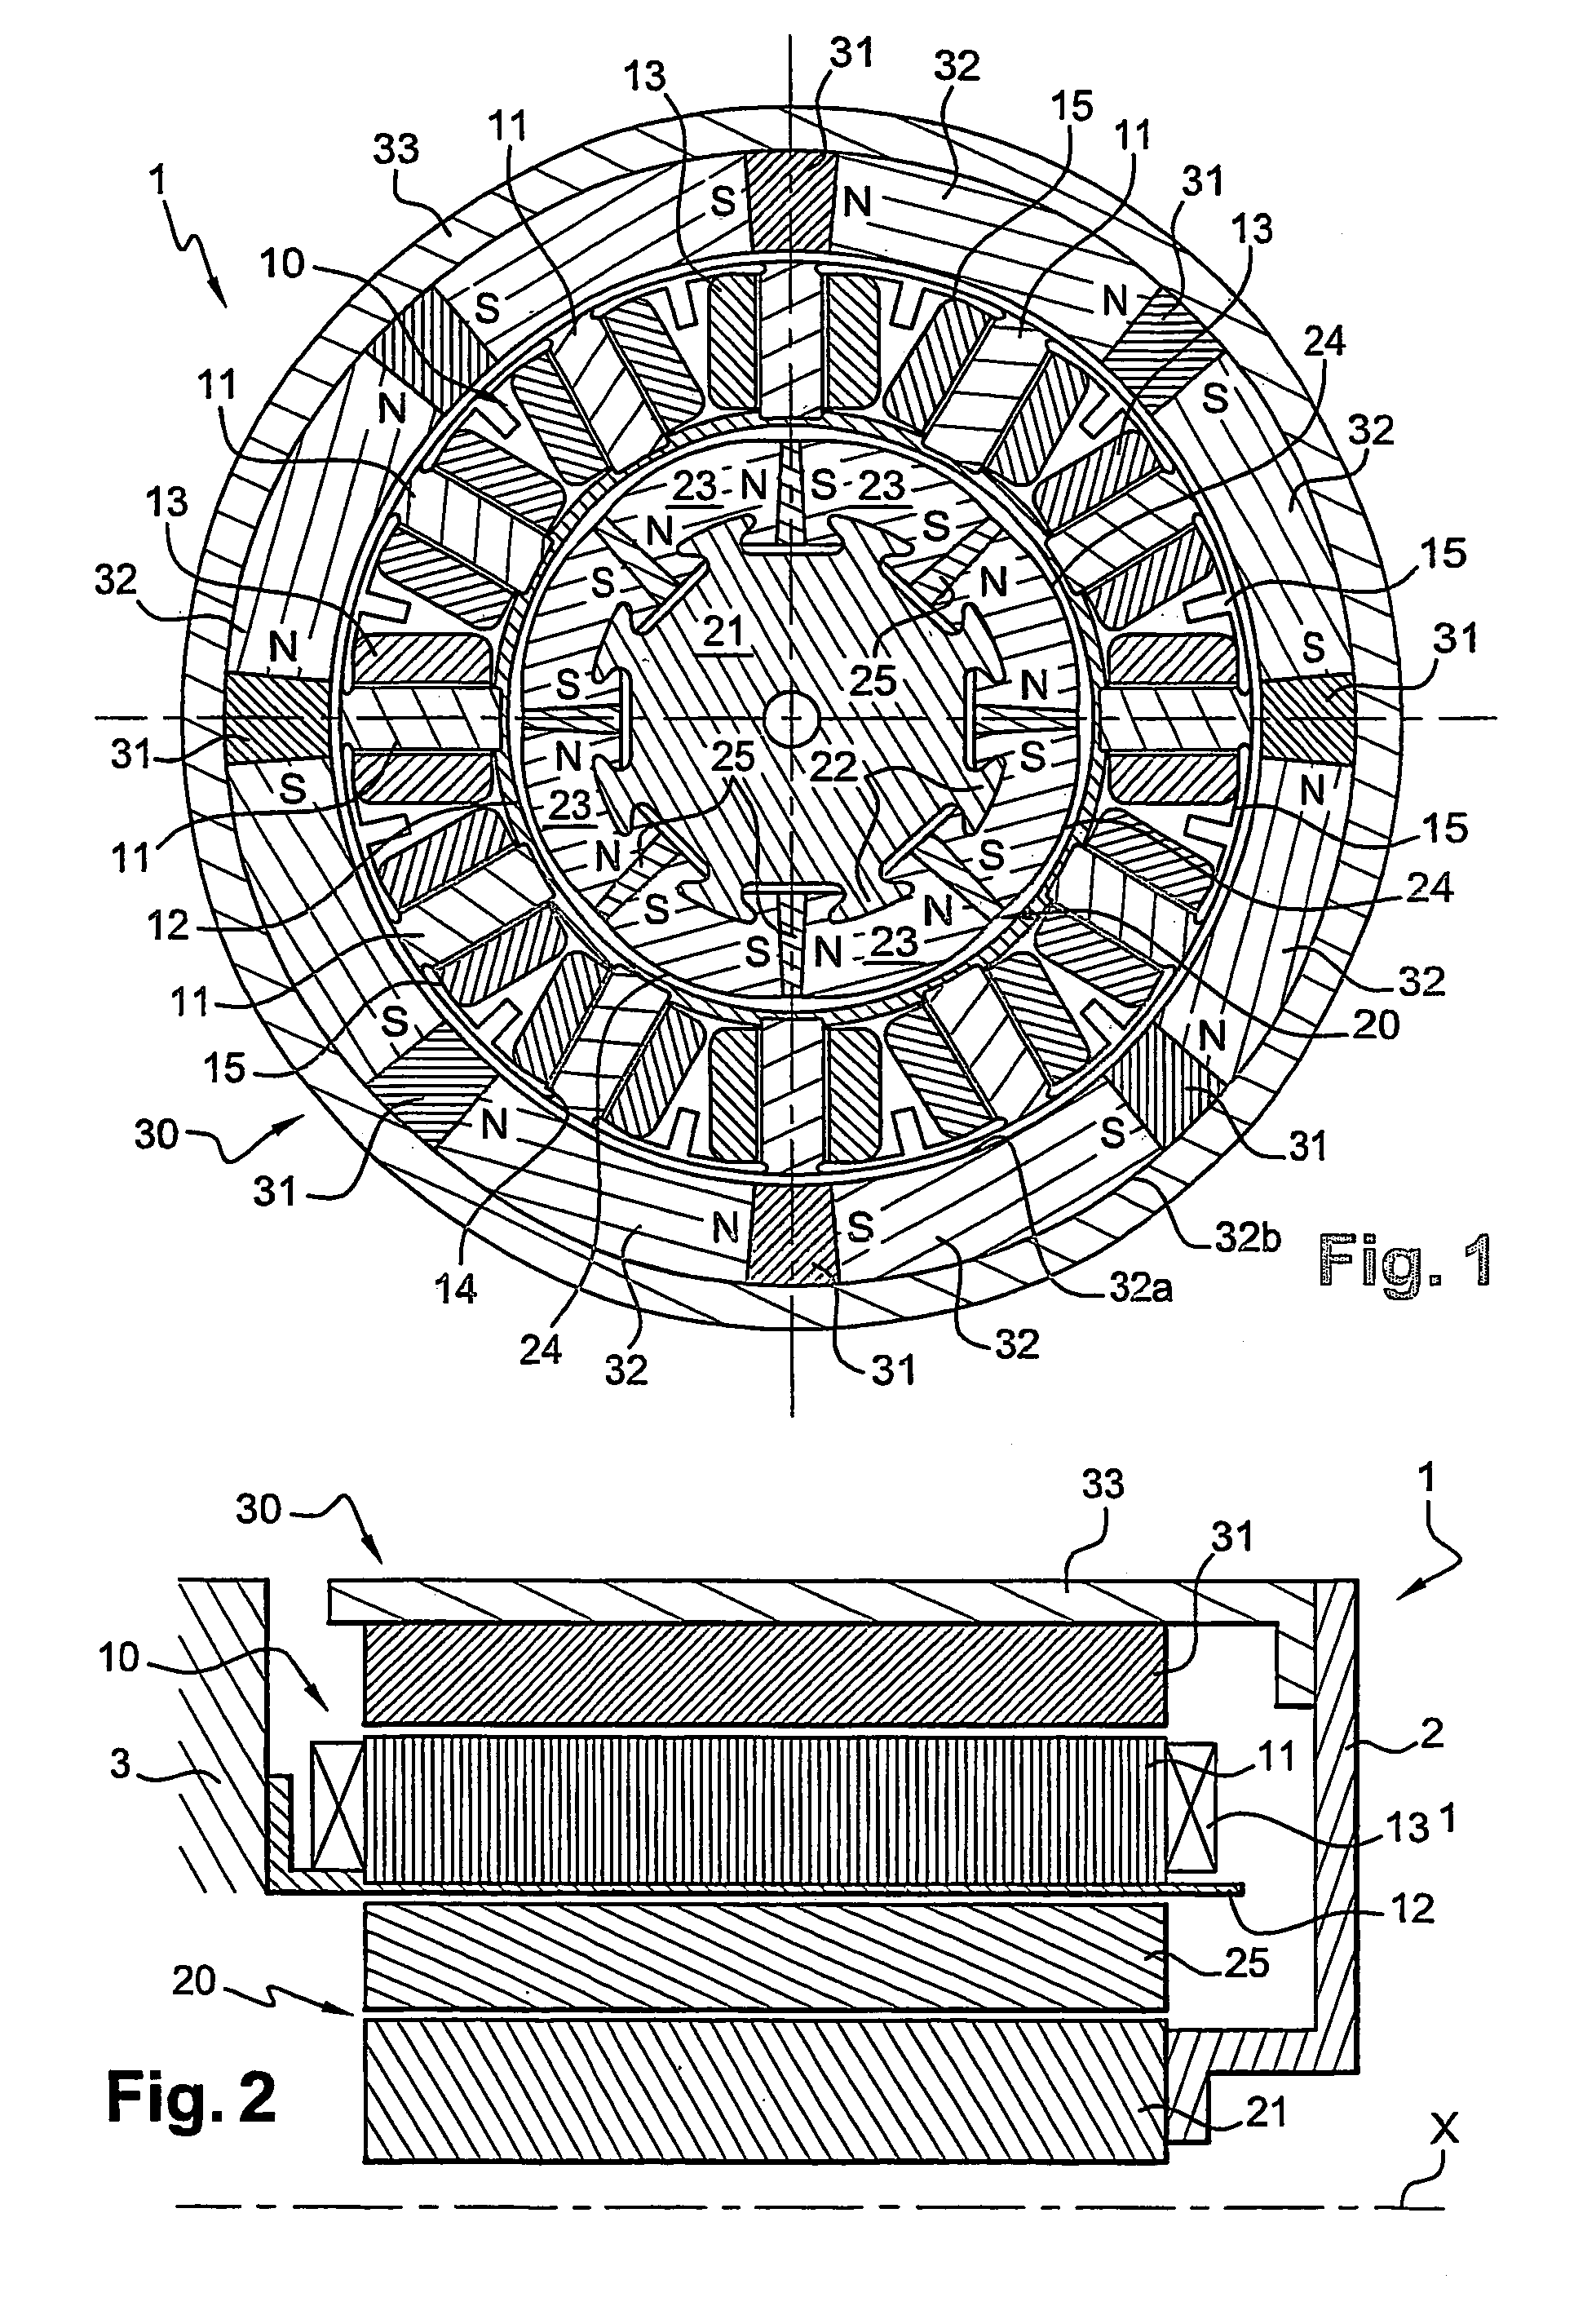 Rotary electric machine comprising a stator and two rotors